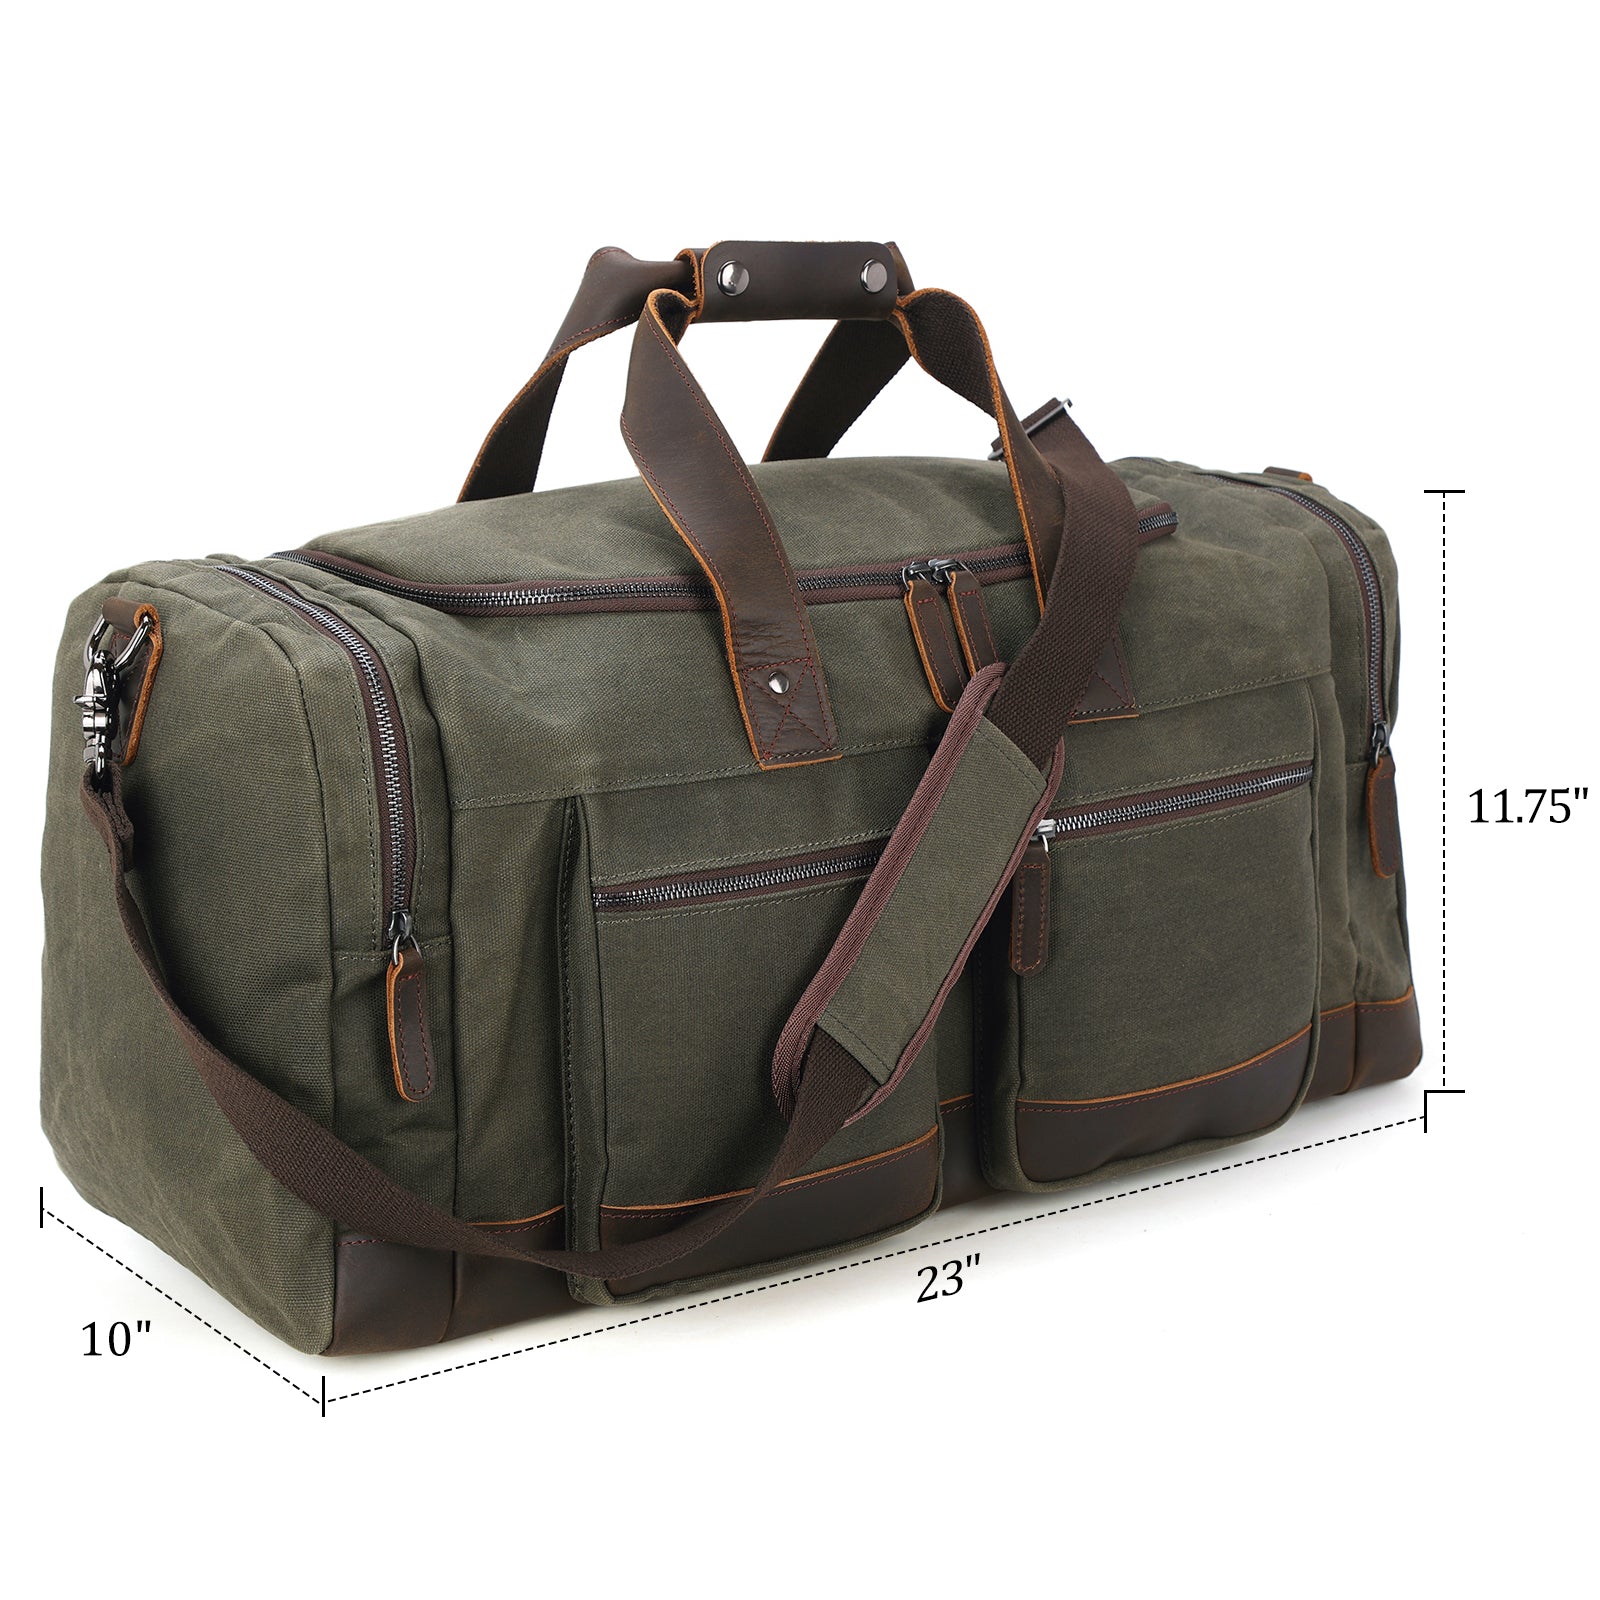 Polare 23” Waxed Canvas Cowhide Leather Waterproof Travel Duffel Bag Trim  Luggage Weekender Overnight Carry on Hand Bag